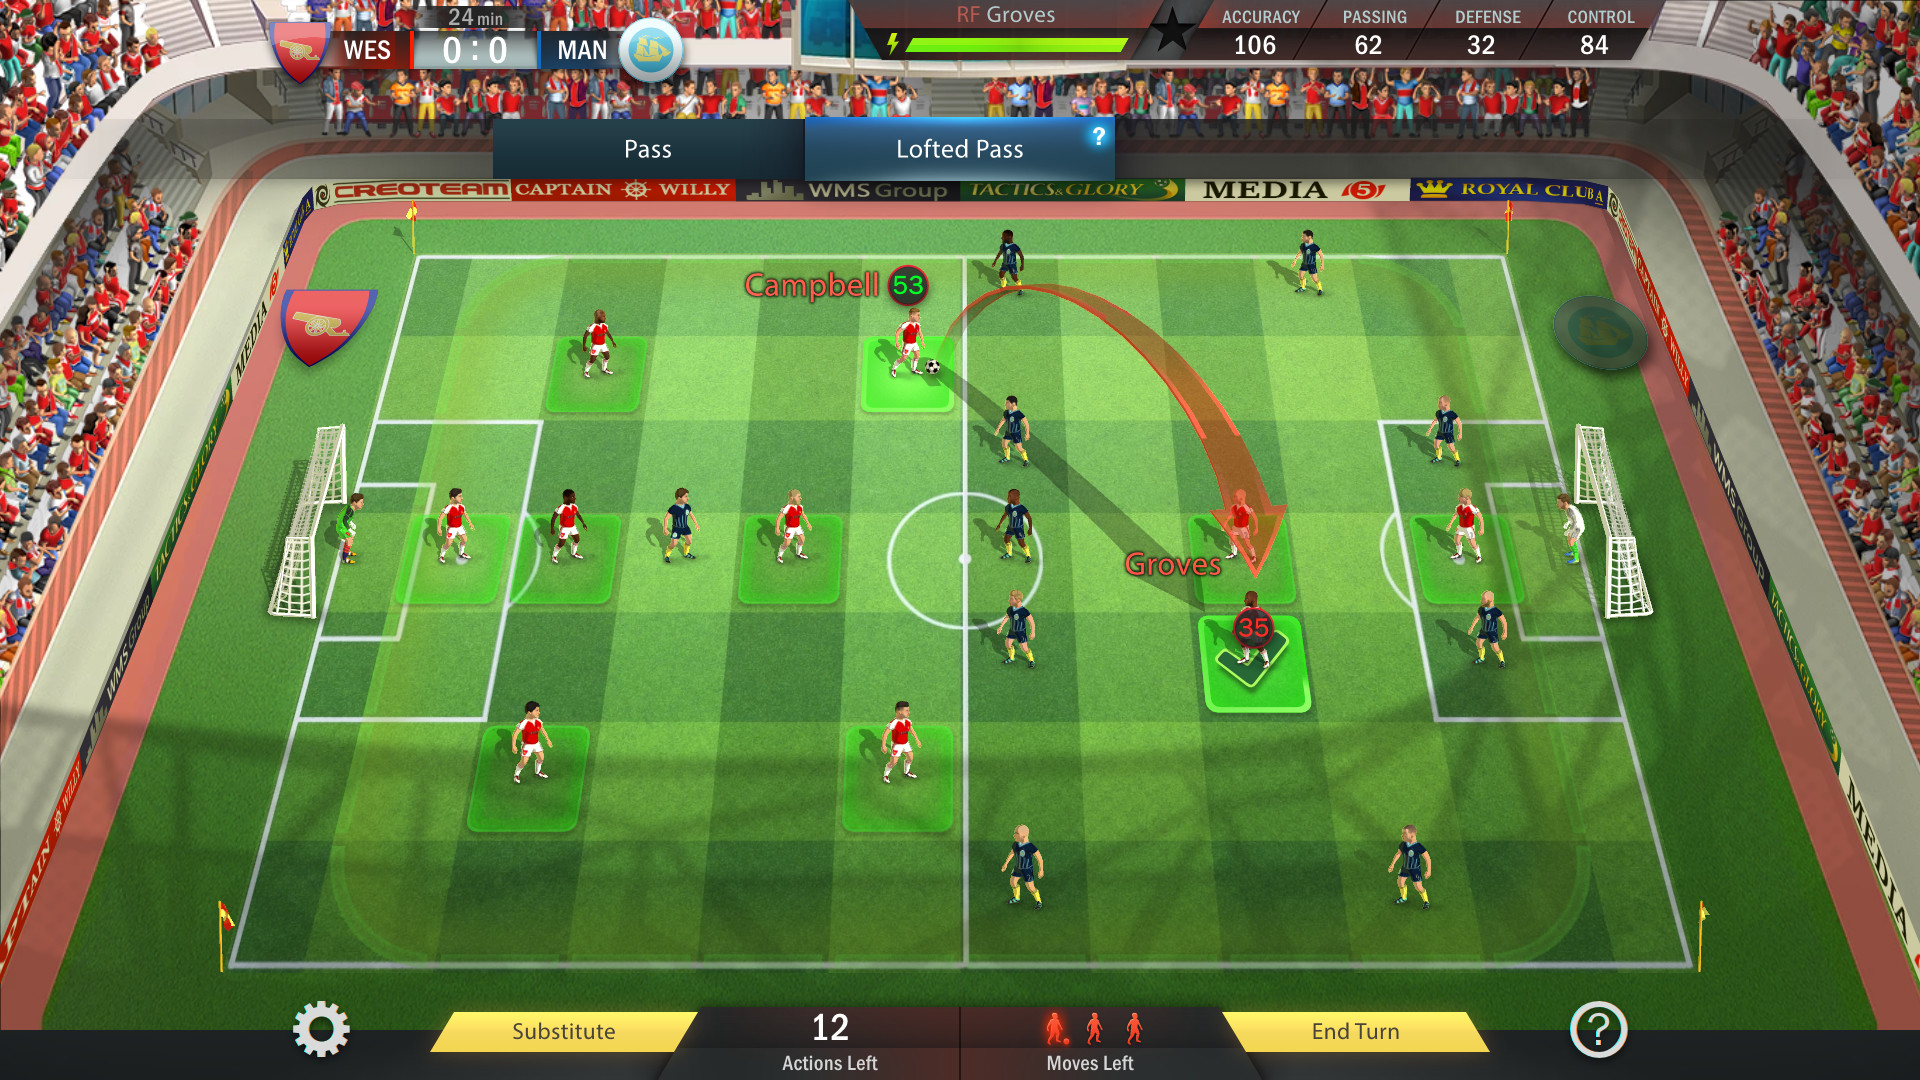 Find the best laptops for Football, Tactics & Glory